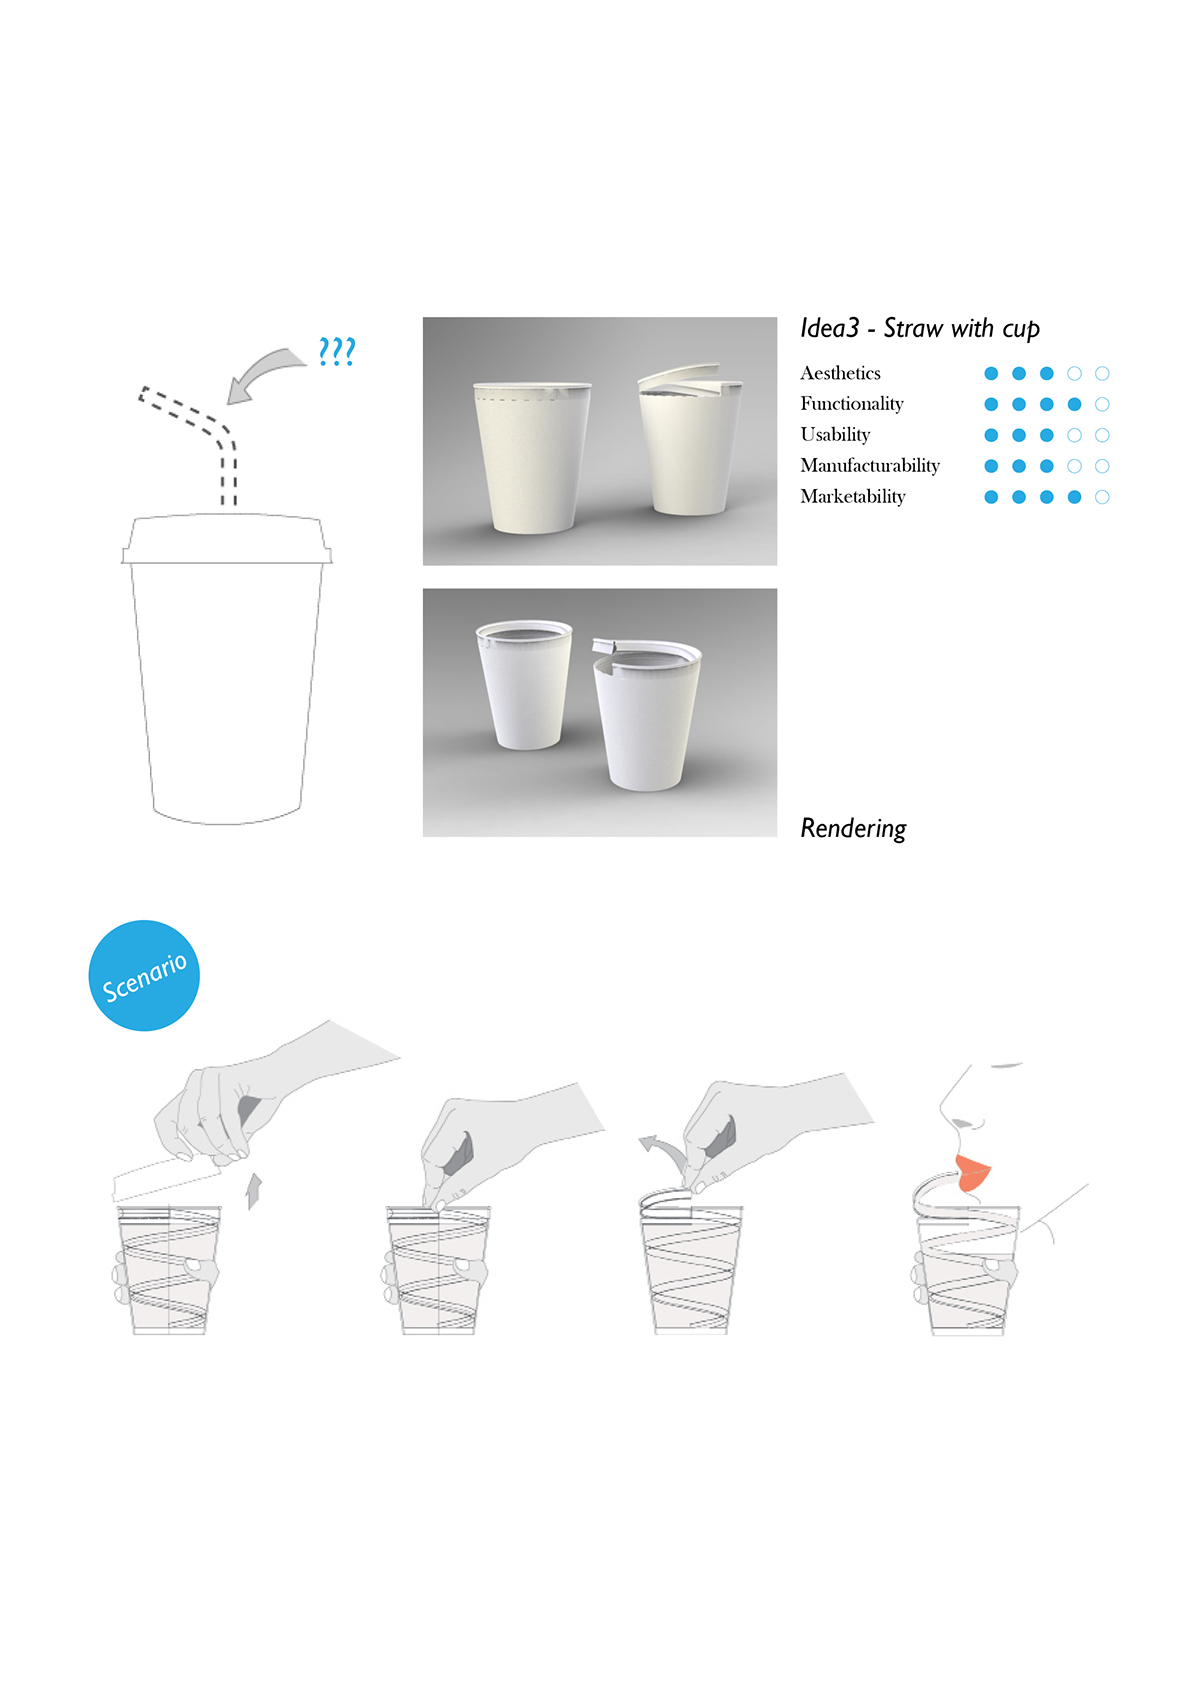 dabao package paper 2D user instruction cup plastic